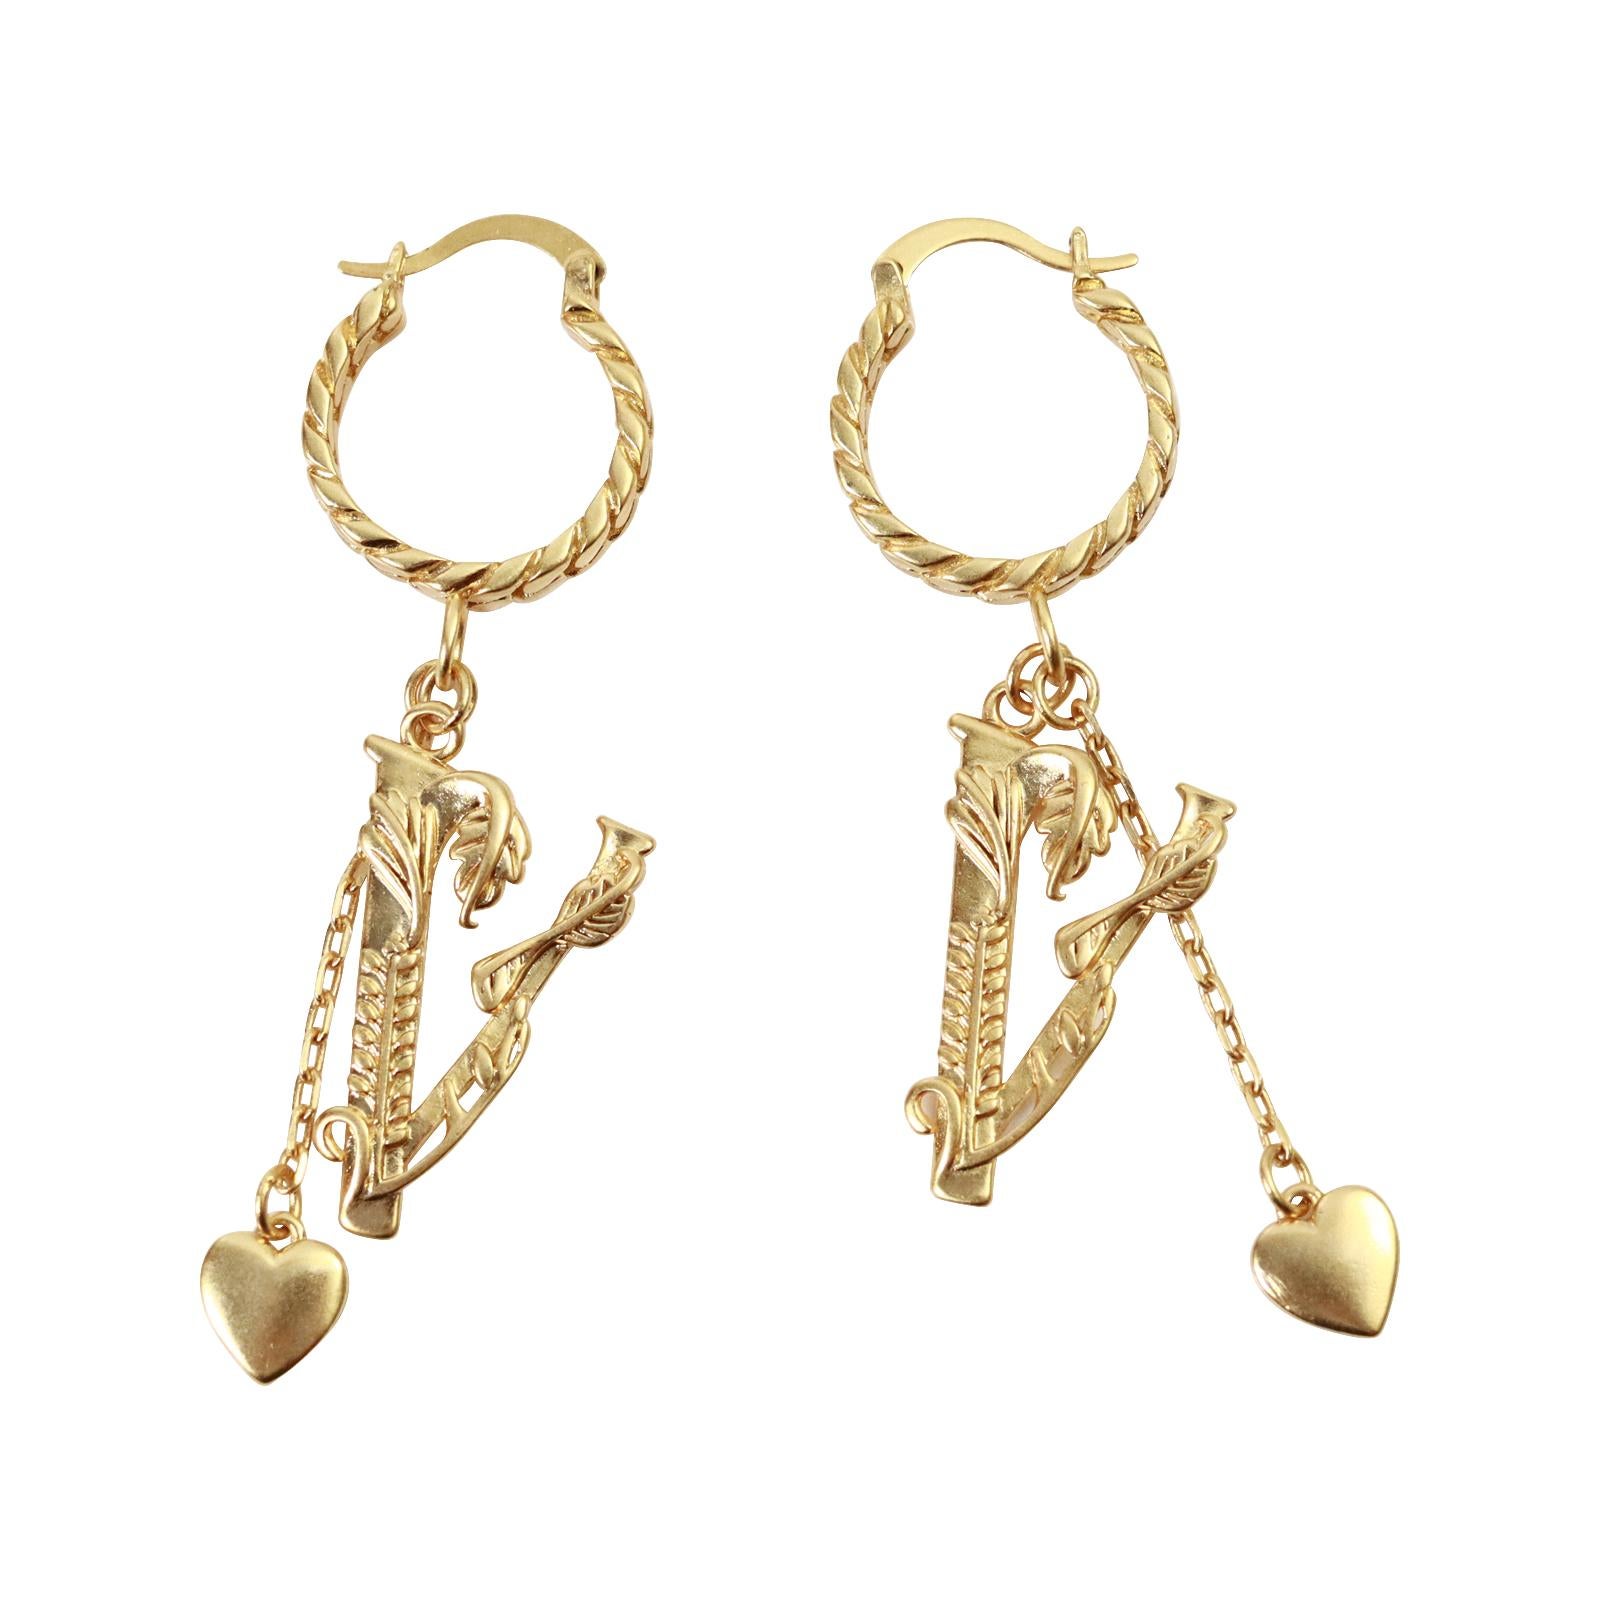 Vintage Versace Gold Tone Dangling Pieces Hoop Earring Circa 2000s.  These great earrings have a small hoop with a long dangling V which has a vine wrapped around it which has a flower on one end and leaves on the other all going up the V. There is